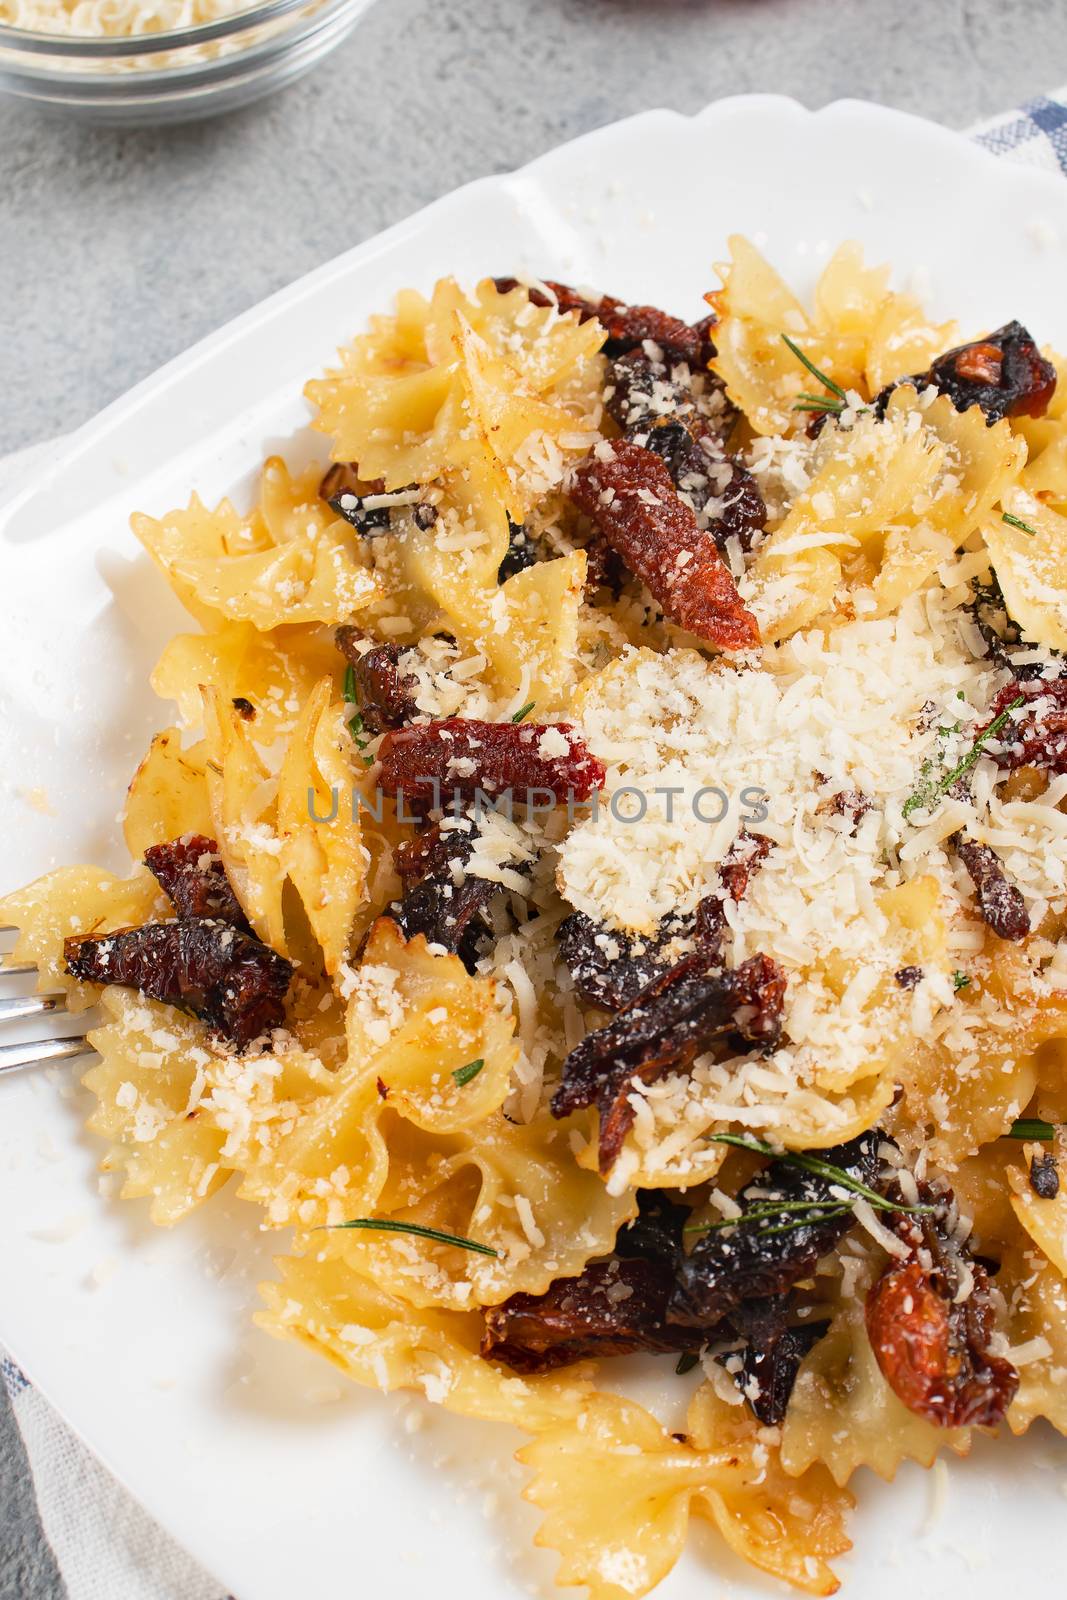 Pasta with sun dried tomatoes and parmesan in a white plate on the table. Italian food dish, vertical image.